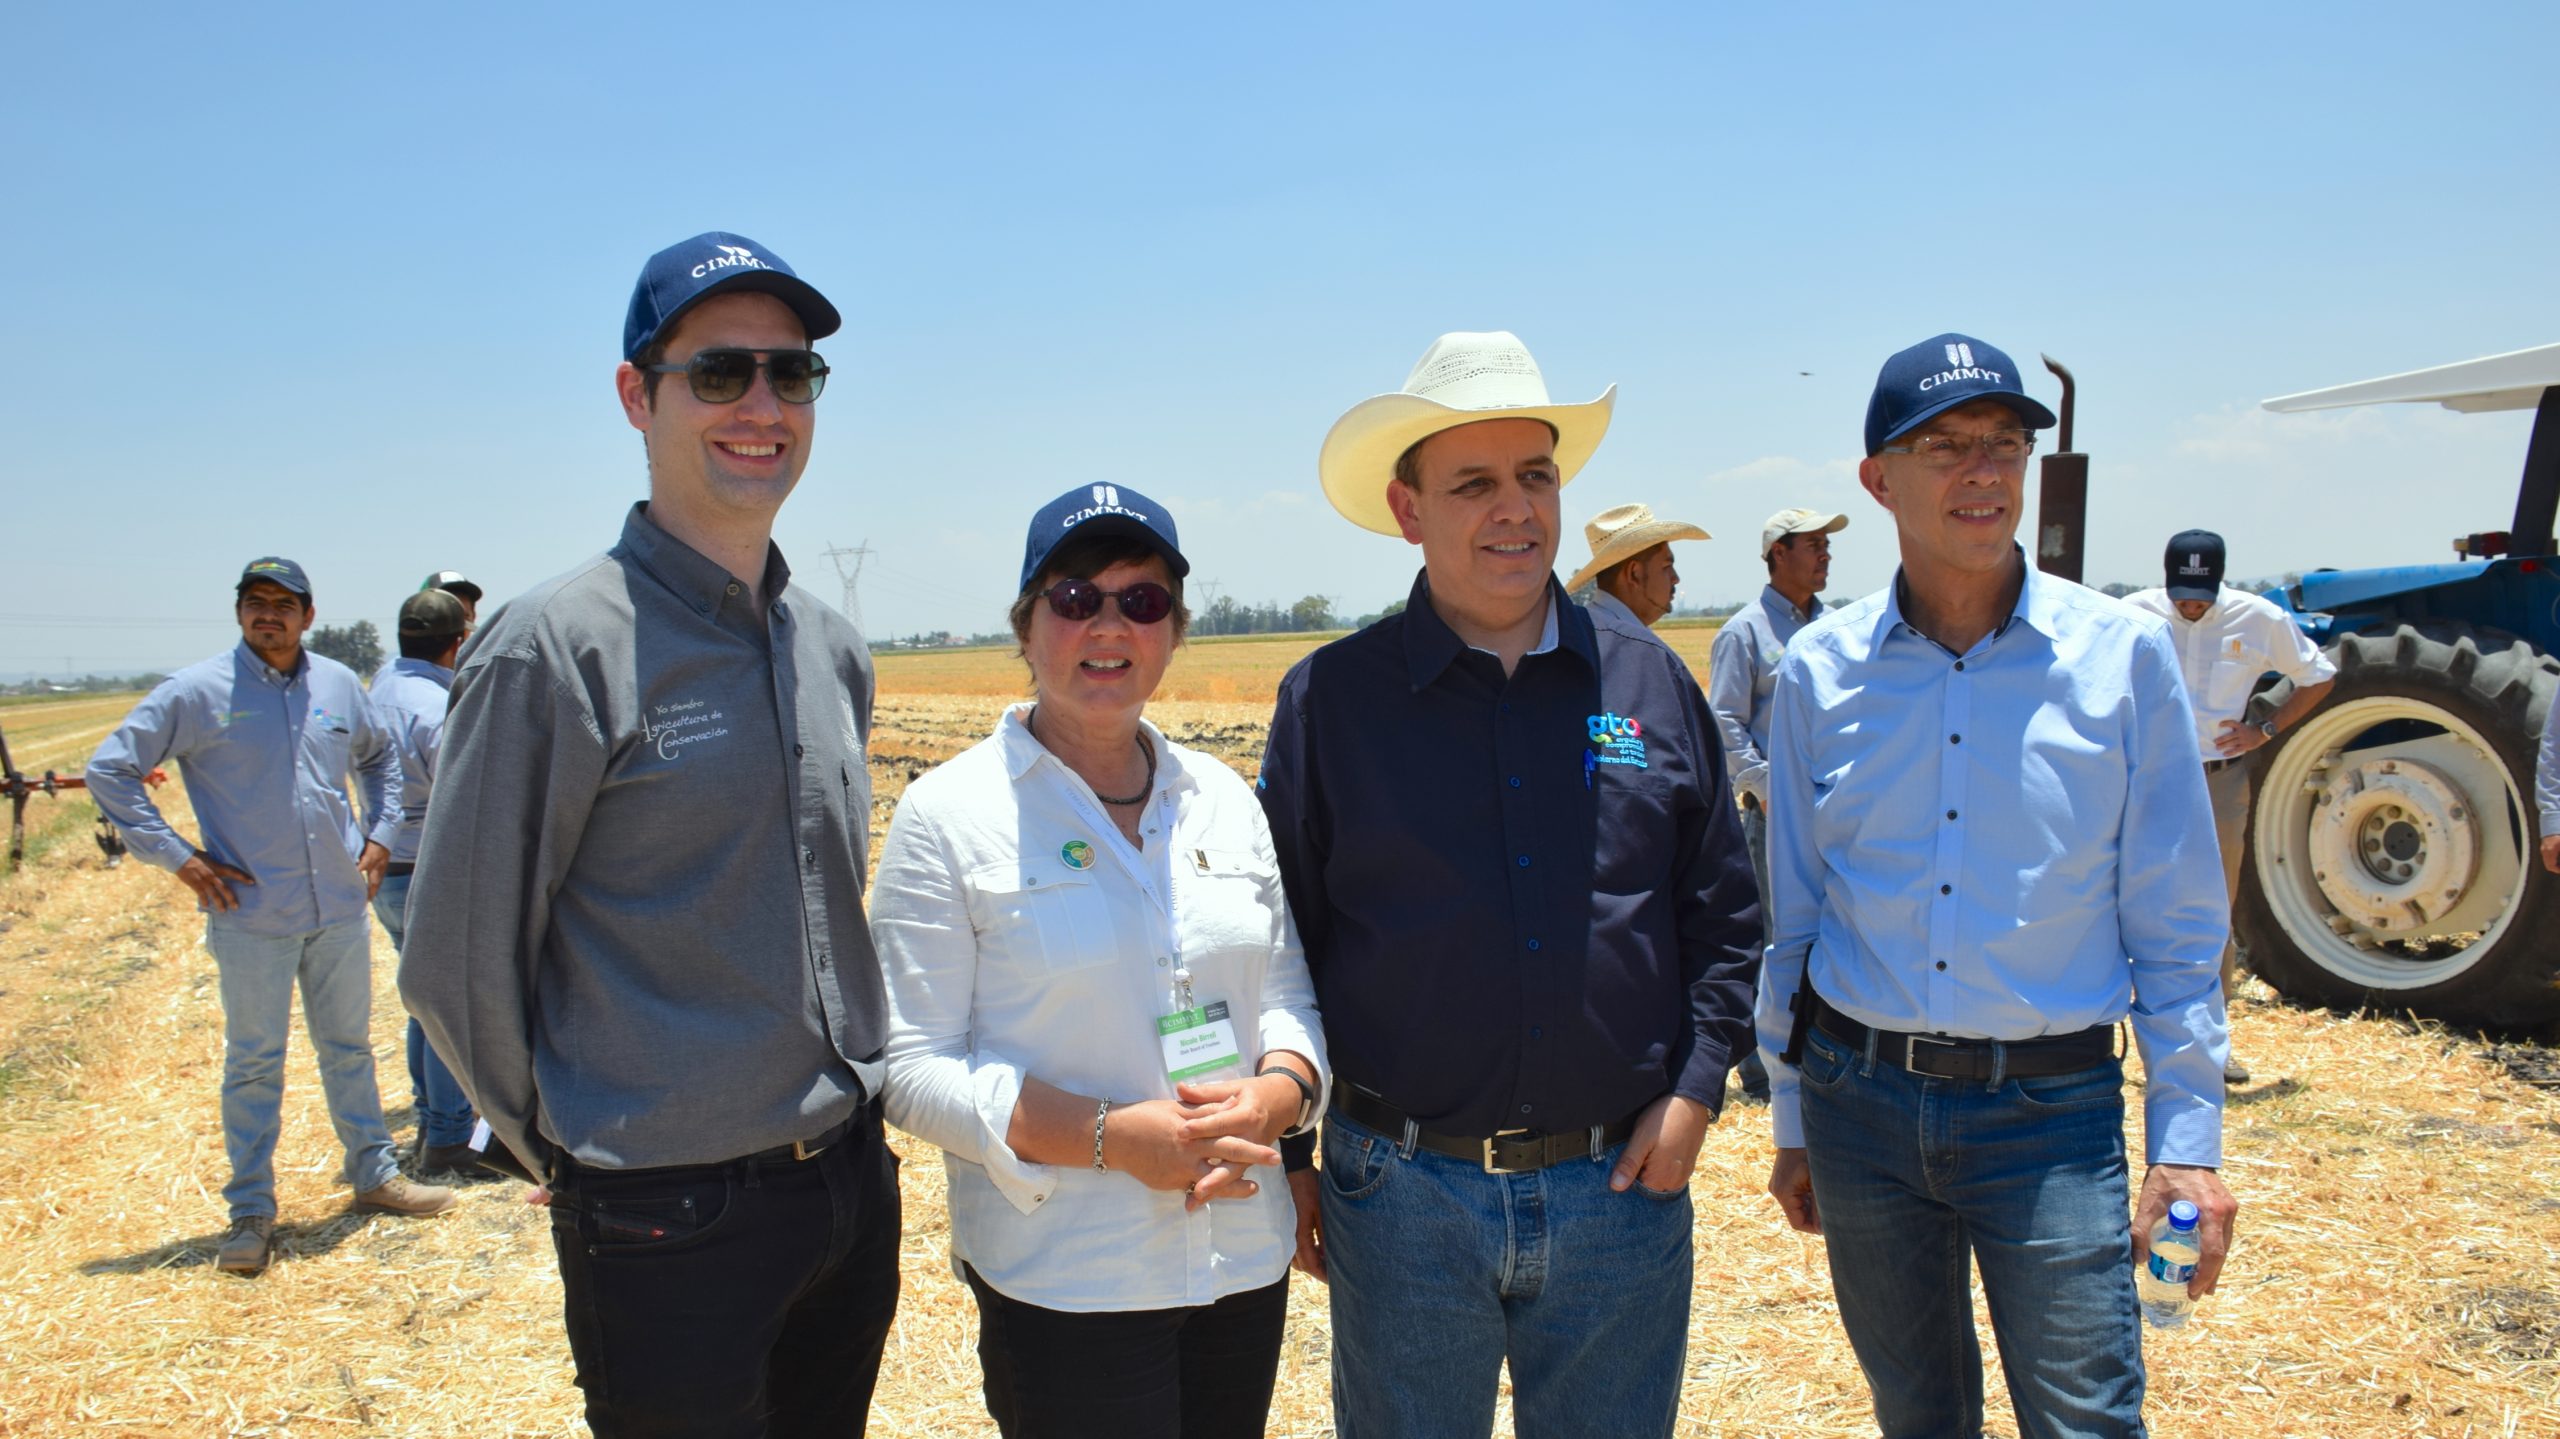 Bram Govaerts (left), Nicole Birrell (second from left) and Martin Kropff (right) stand for a group photo with José Francisco Gutiérrez Michel (second from right), Secretary of Agri-Food and Rural Development of Mexico's Guanajuato state.